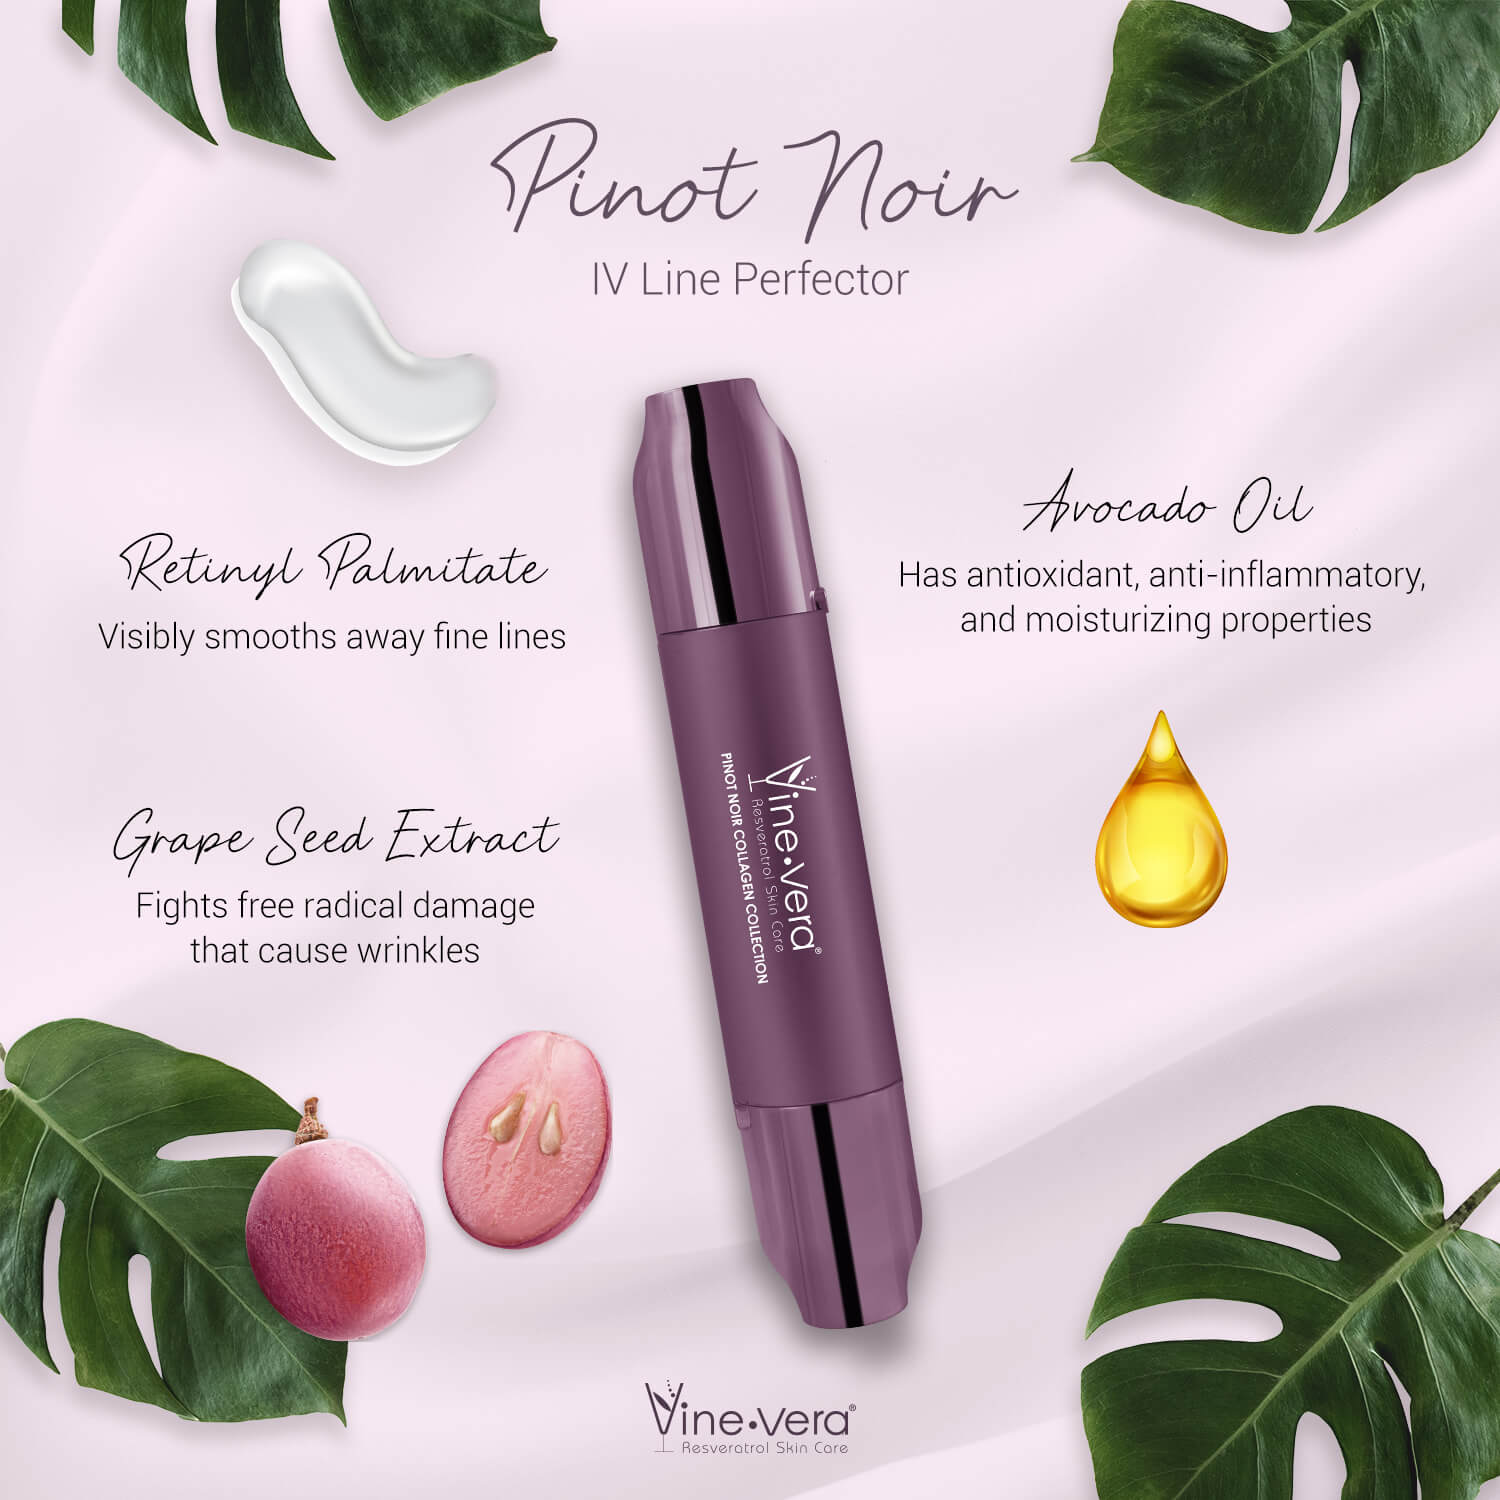 Pinot Noir IV Line Perfector infographic